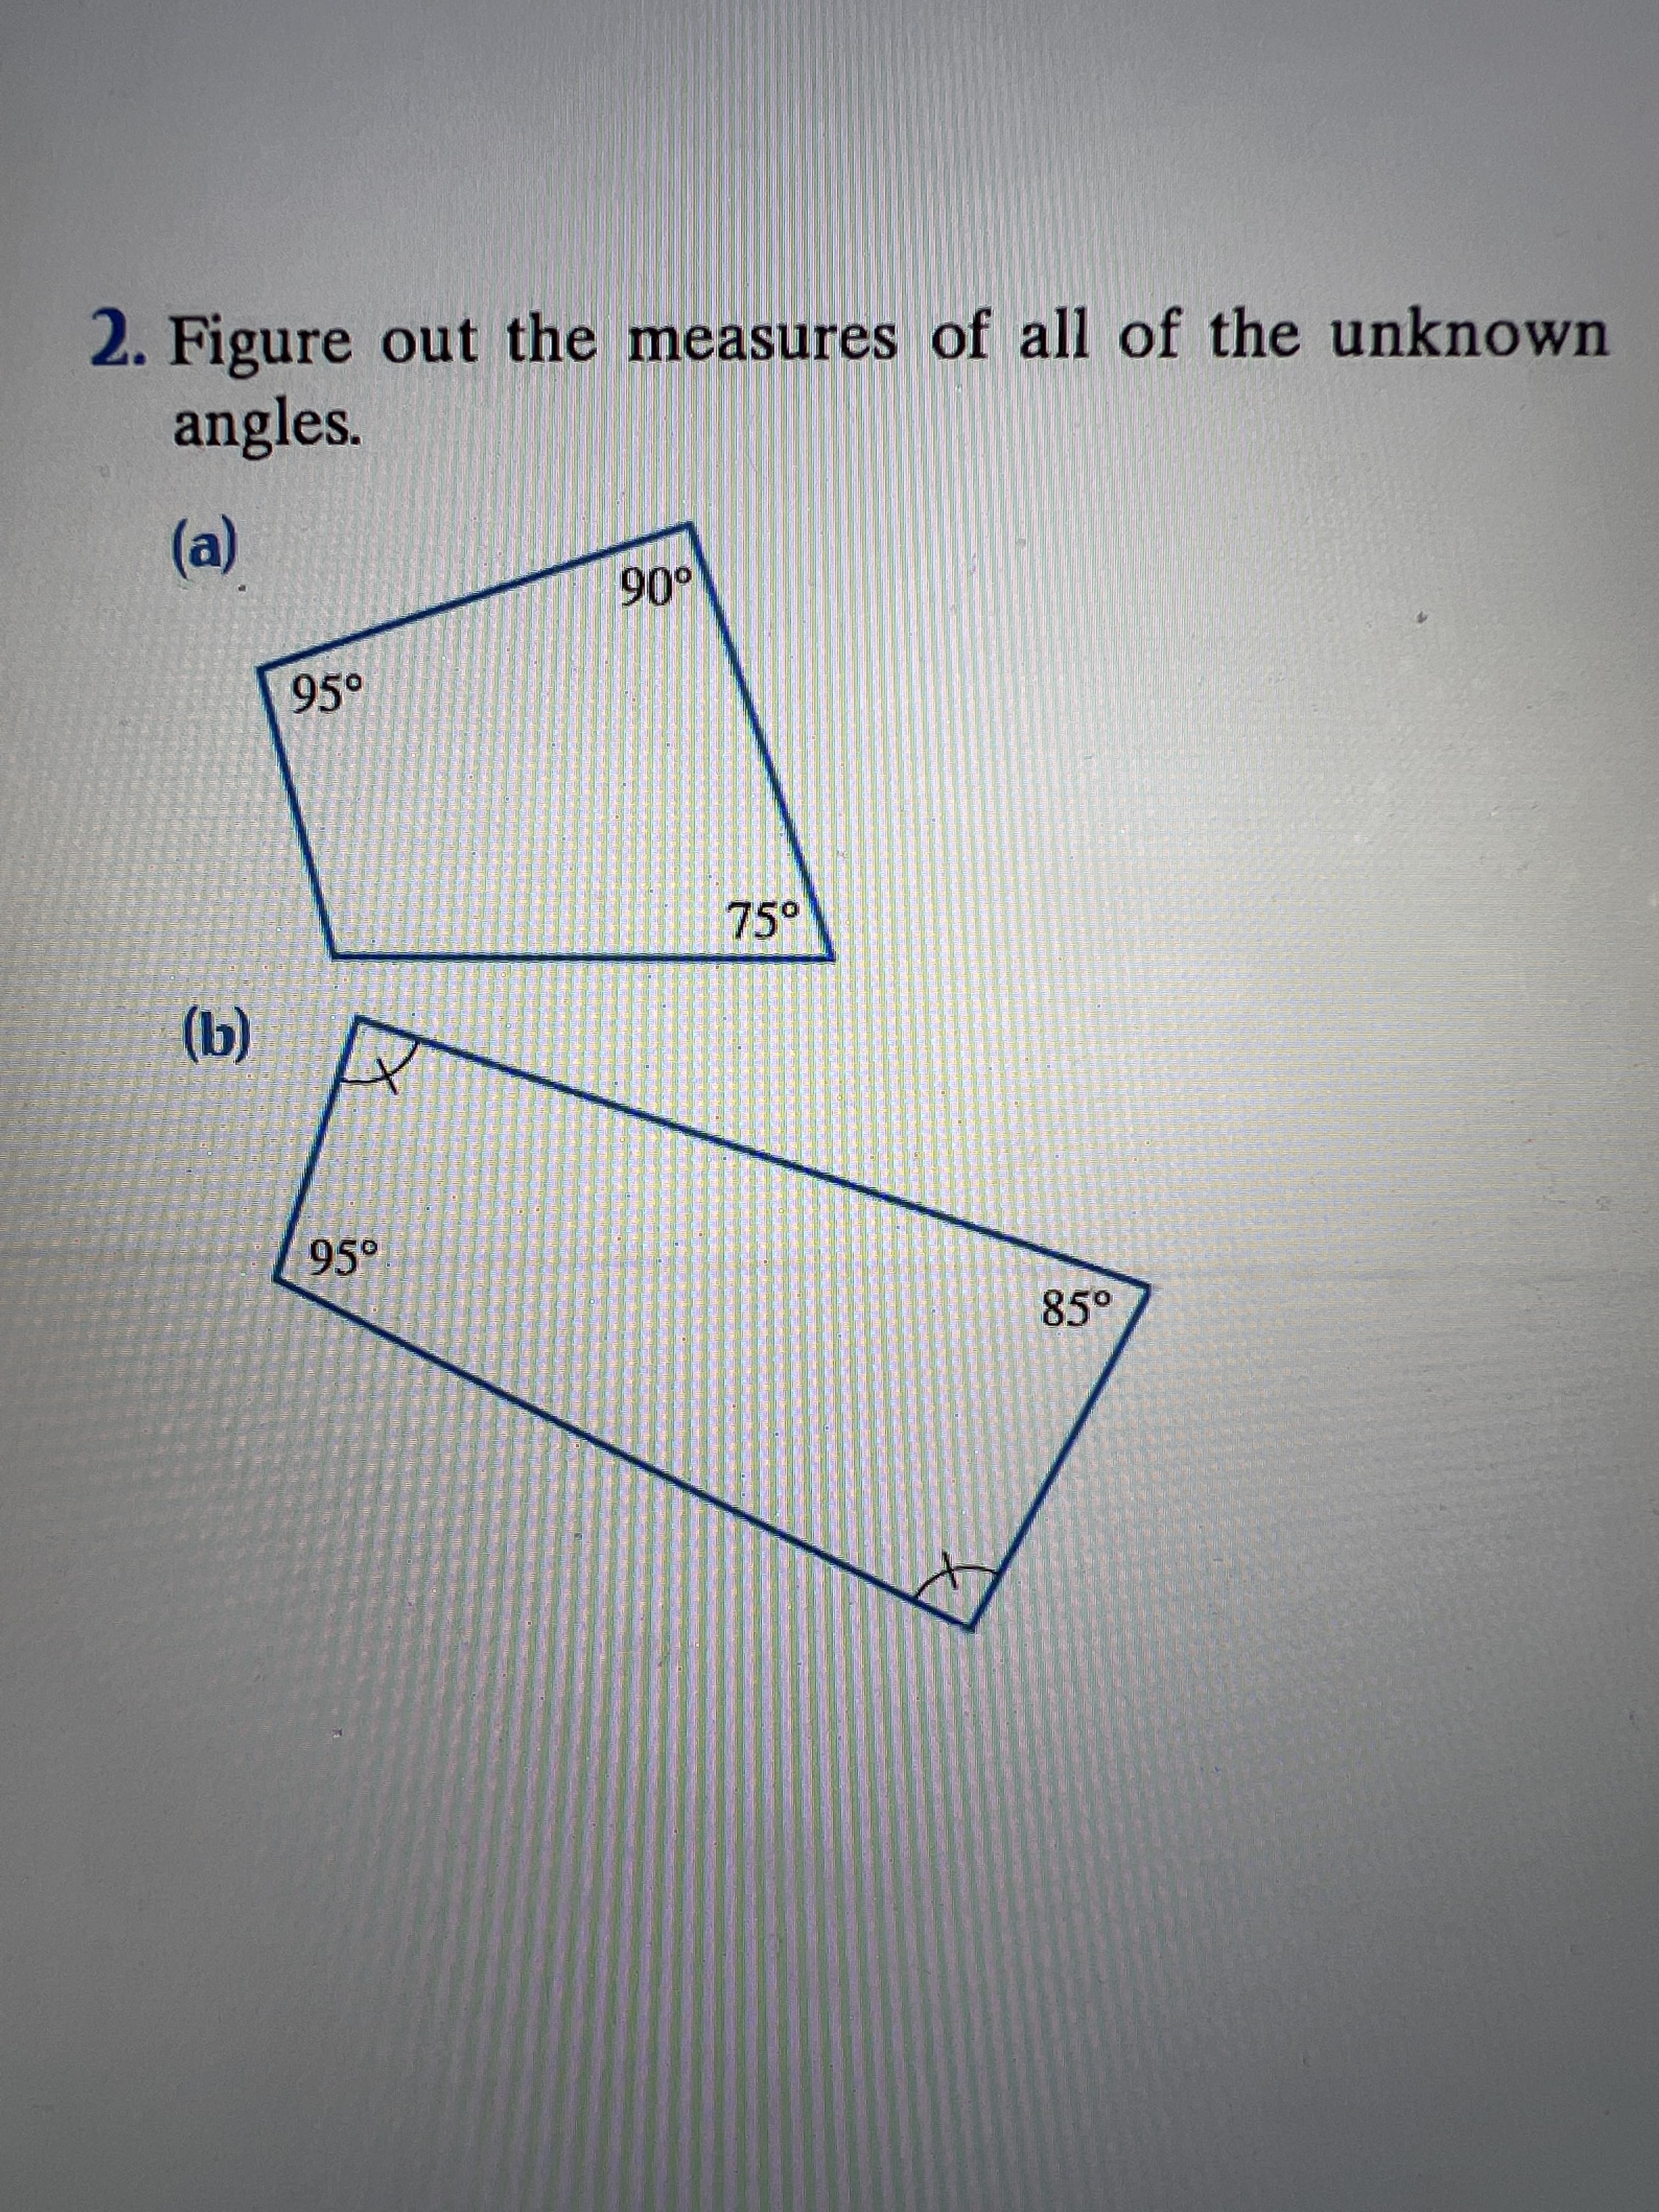 2. Figure out the measures of all of the unknown
angles.
o06
(9)
95°
85°
